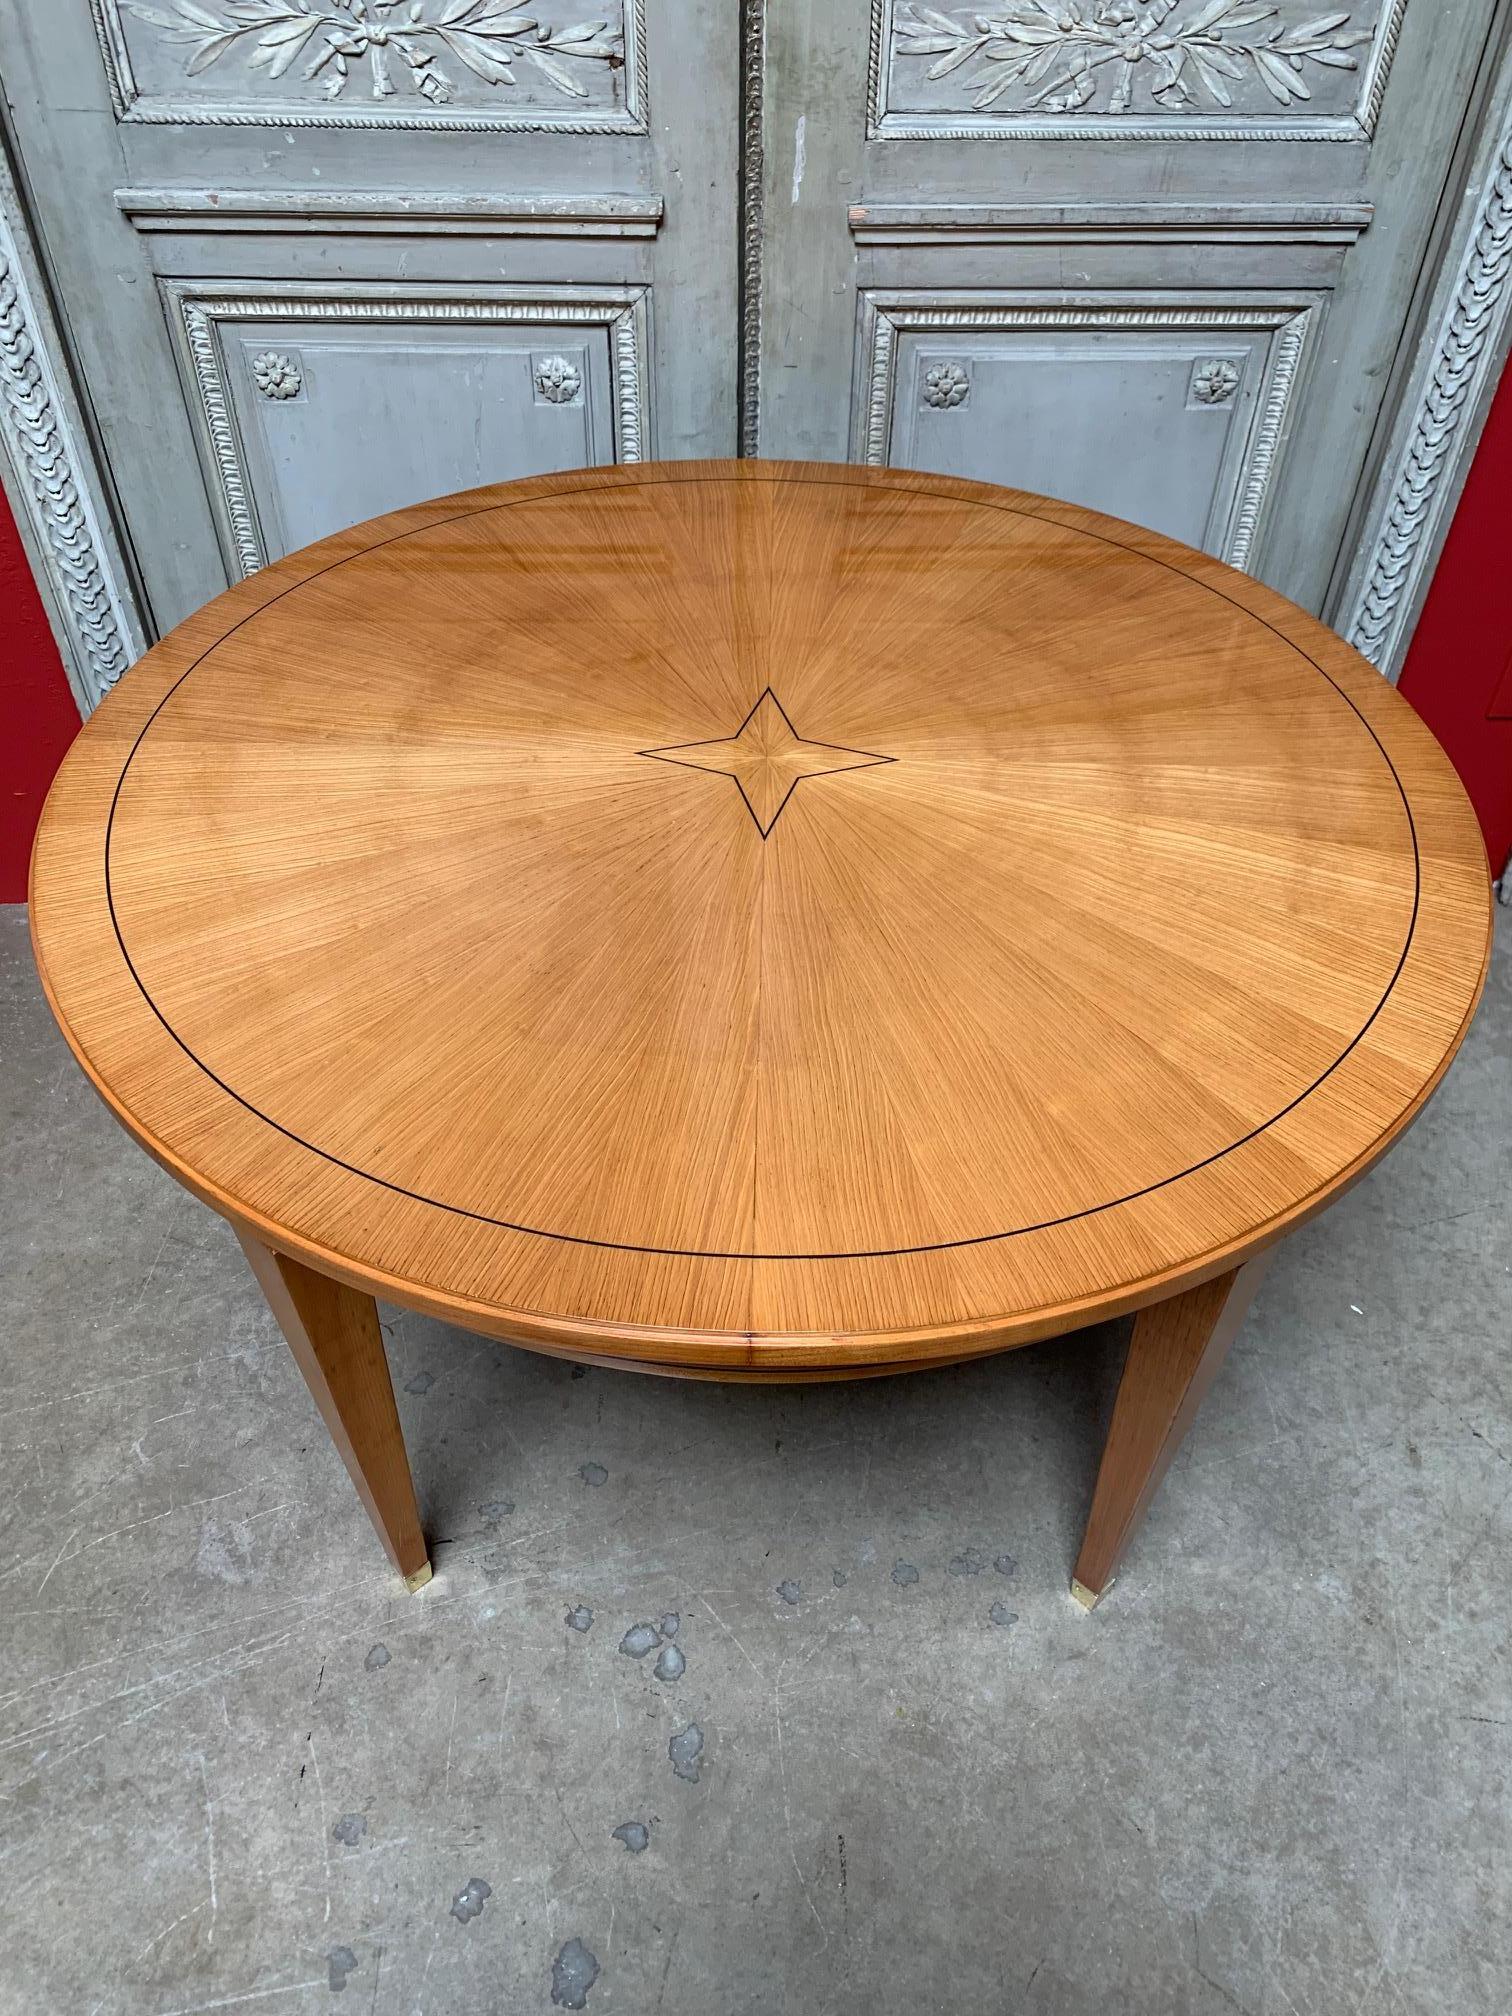 Bronze 20th Century French Directoire Style Round Mahogany Table with Parquetry Inlay